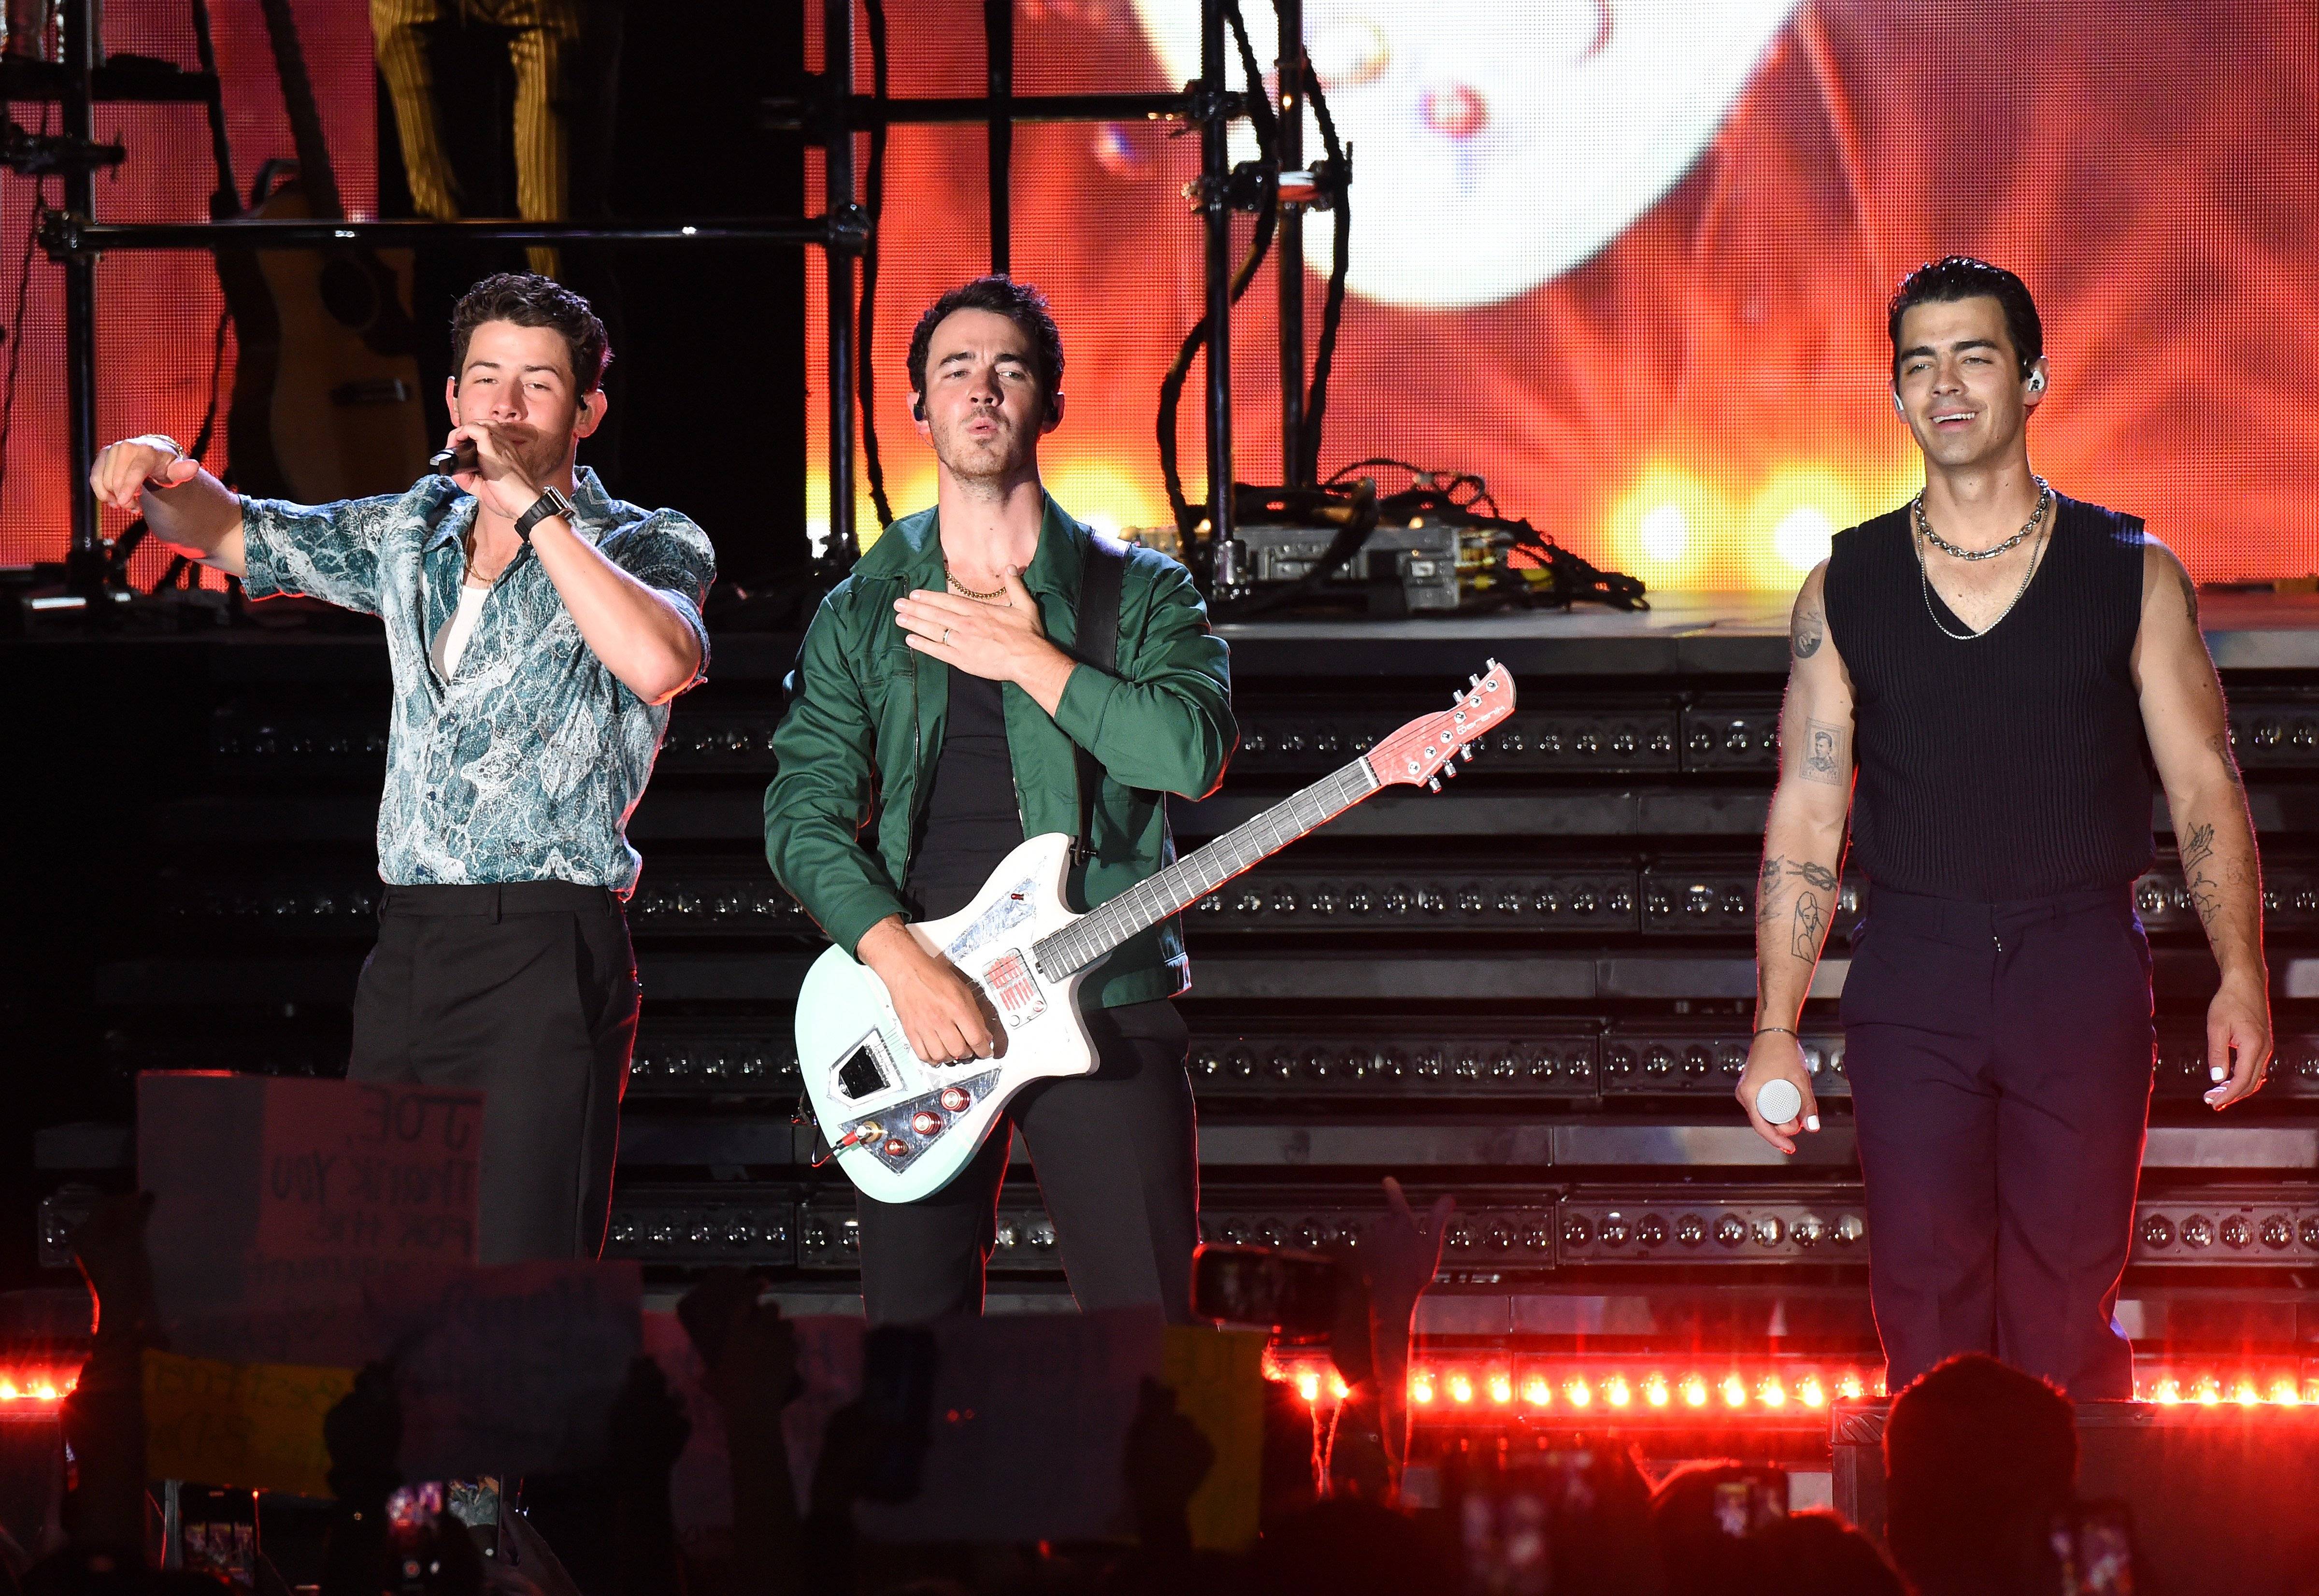 jonas brothers tour remember this